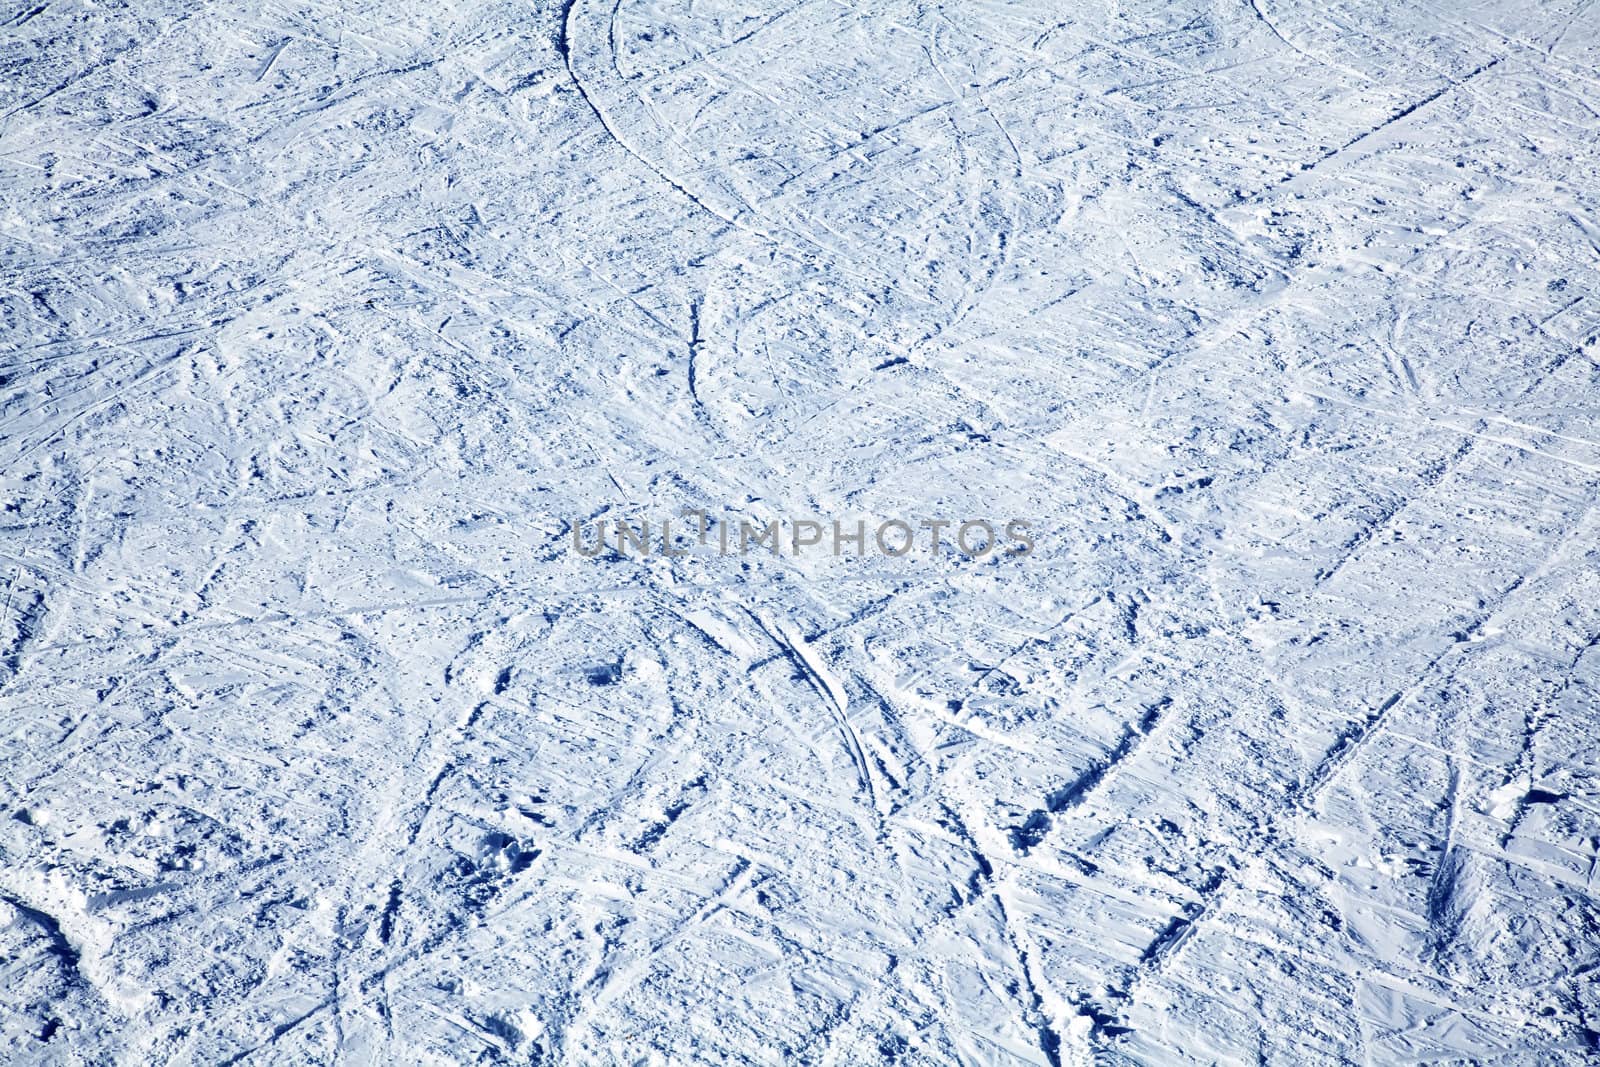 Surface of snow with lines
